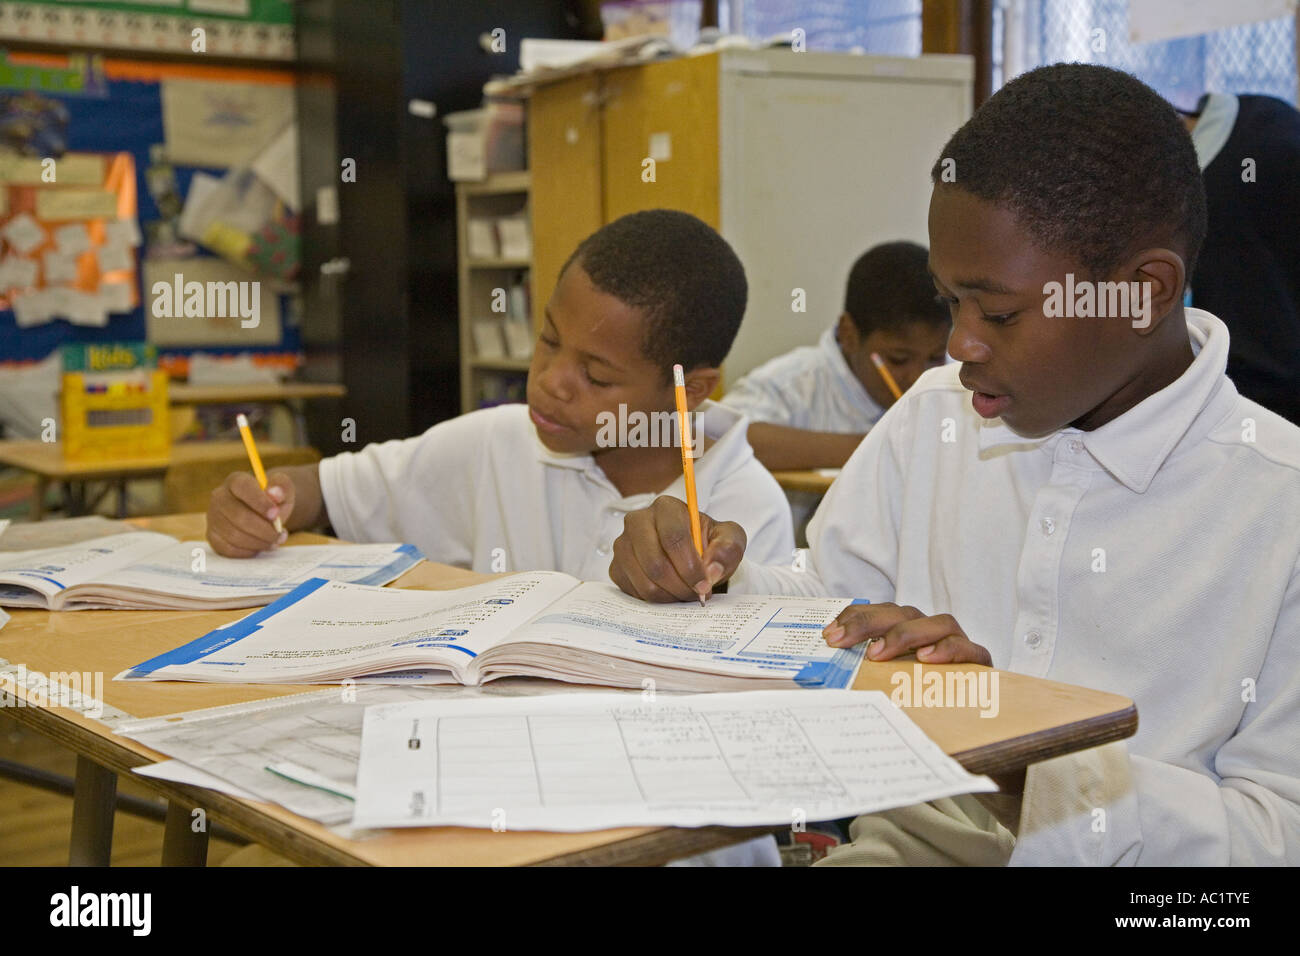 Detroit Michigan Students at Guyton Elementary School part of the Detroit Public School system Stock Photo